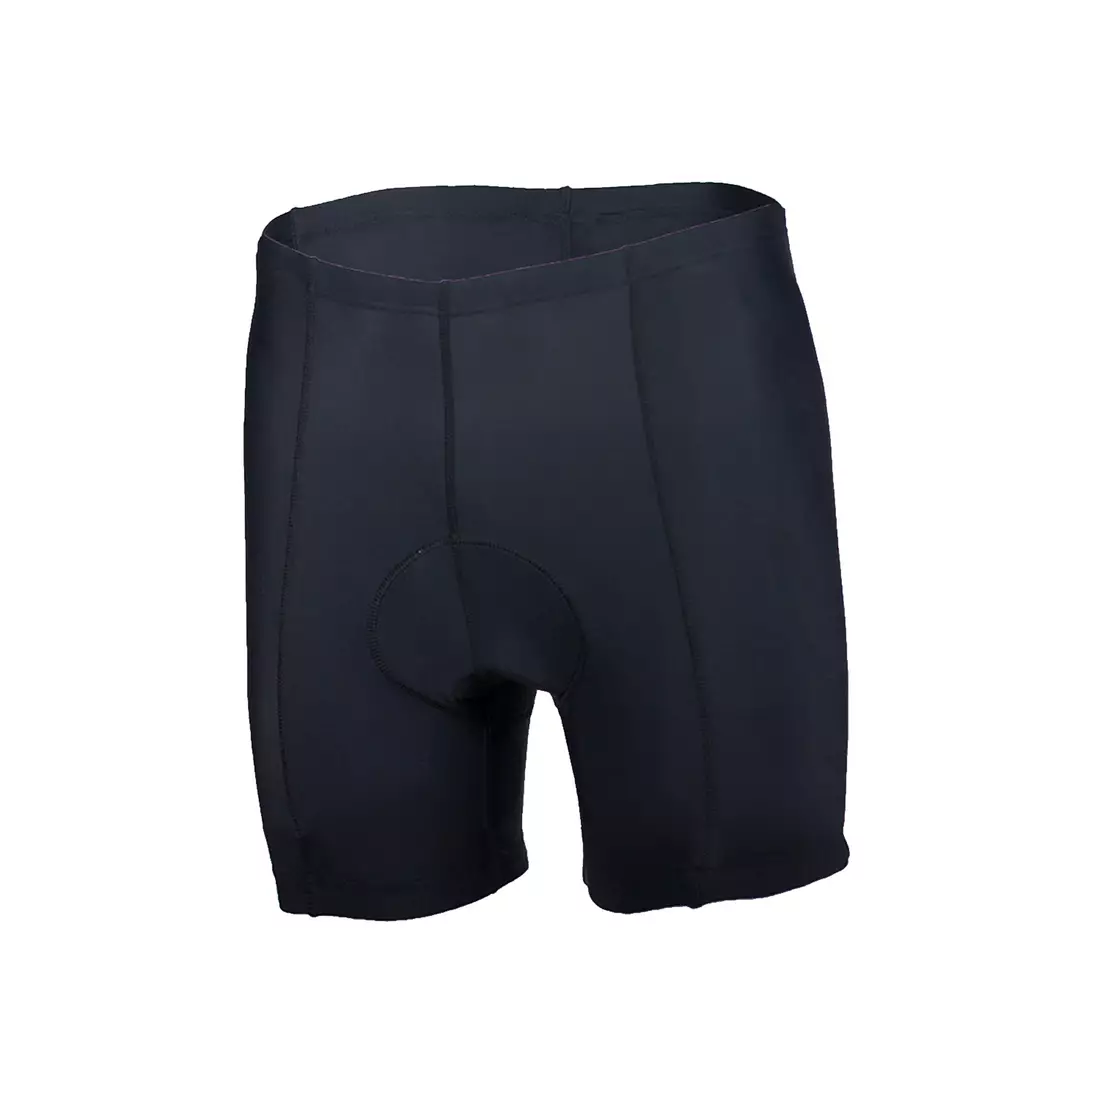 Rogelli 002.700 ECON children's cycling shorts without harness, black